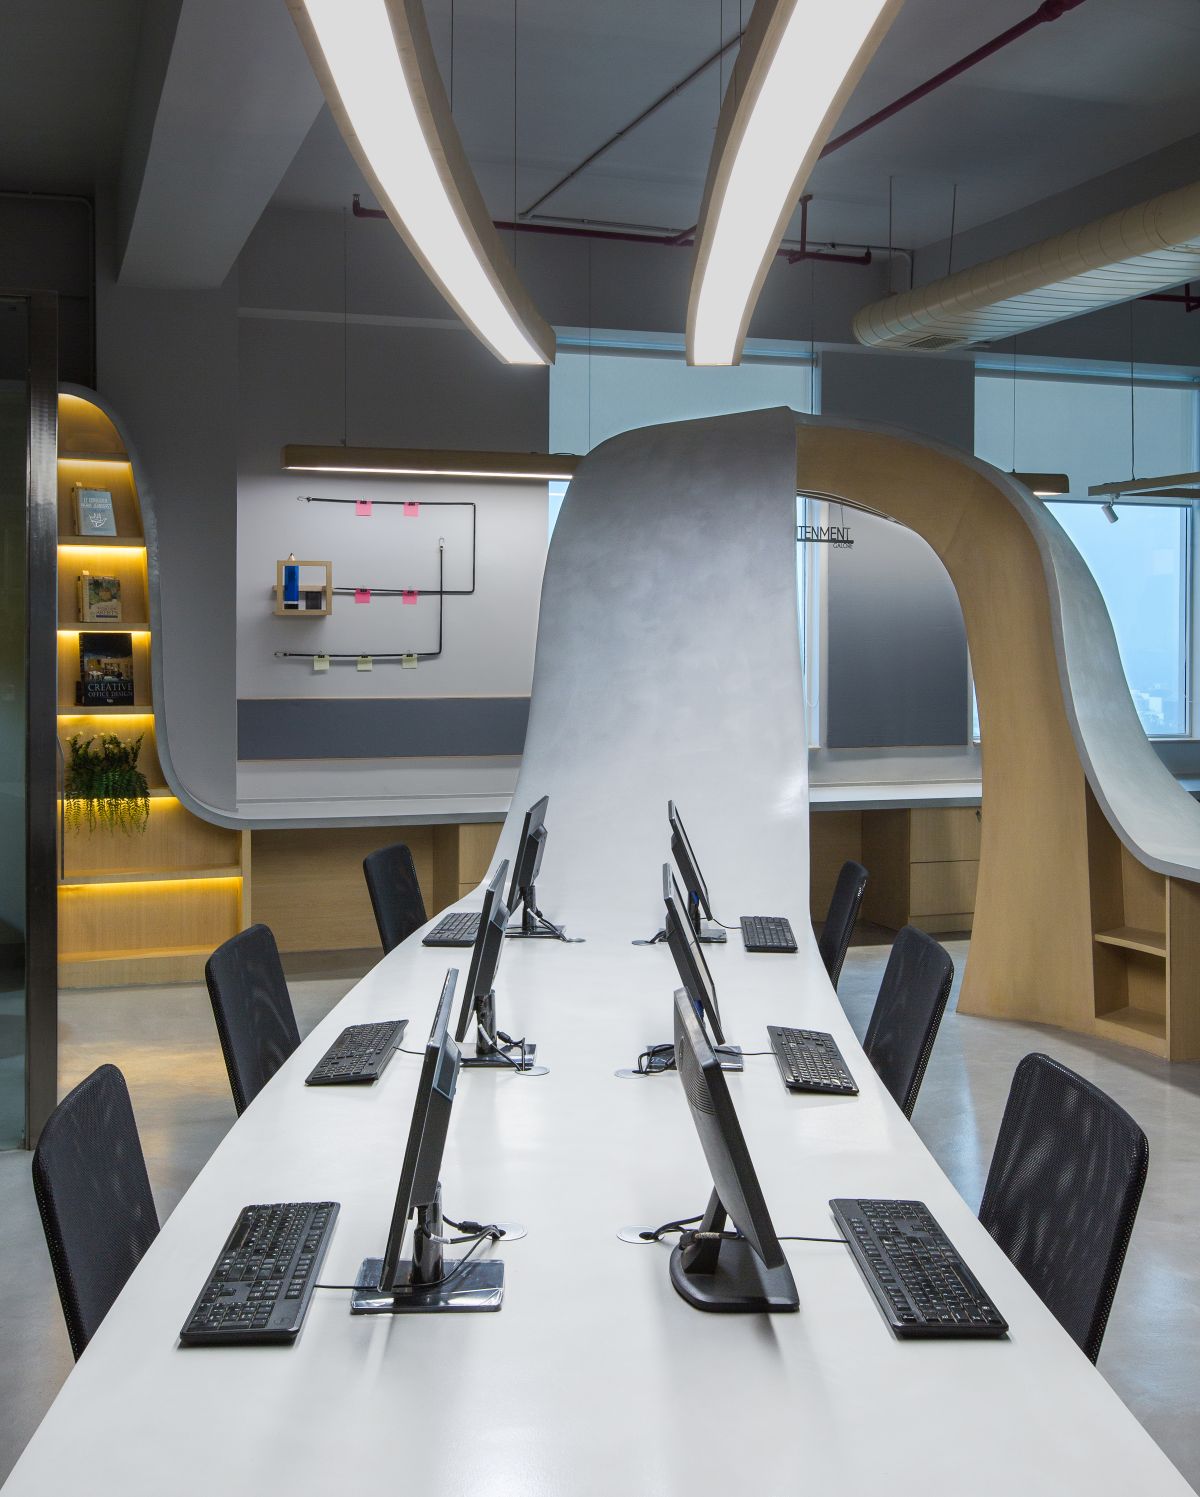 The Spatial Stimuli - An Architect's Office, at New Delhi, by Creative Designer Architects 9